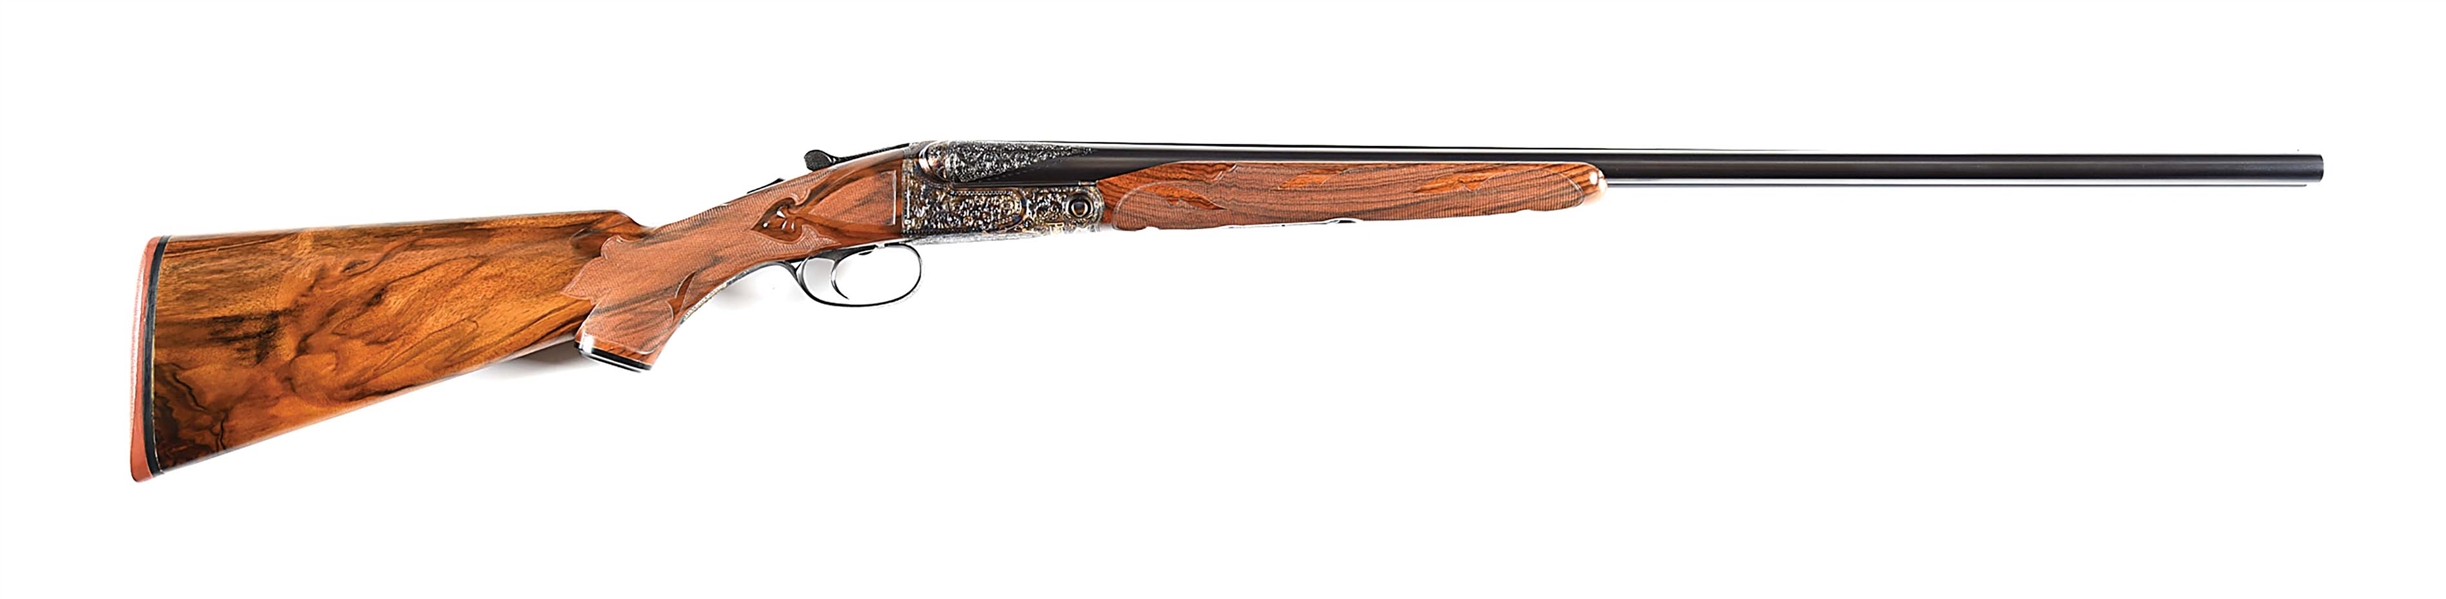 (C) UPGRADED TO A1-SPECIAL GRADE PARKER 20 BORE SIDE BY SIDE SHOTGUN.